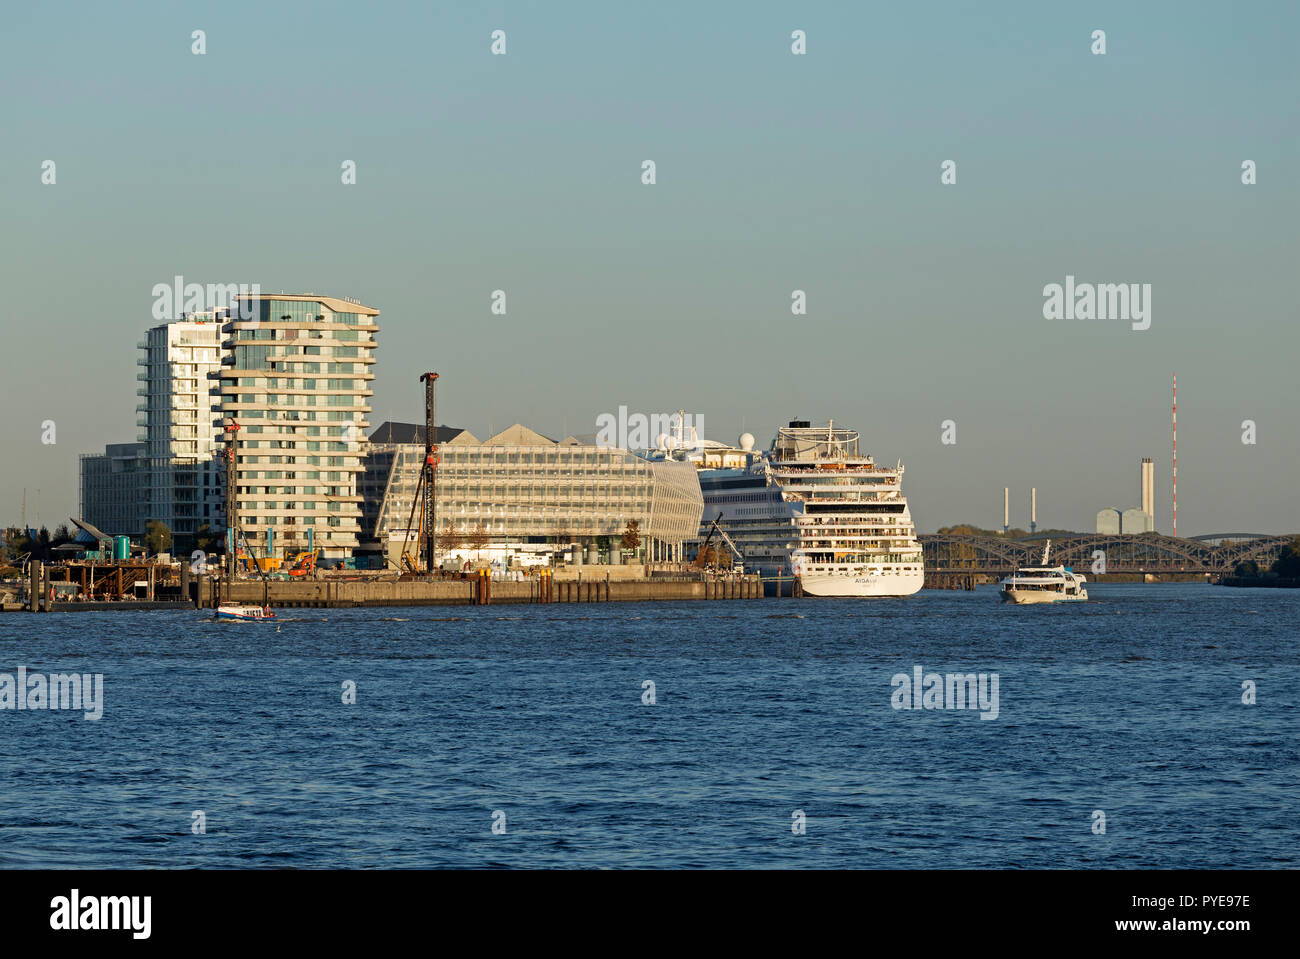 Cruise Ship Aidasol Marco Polo Tower And Unilver House Harbour City